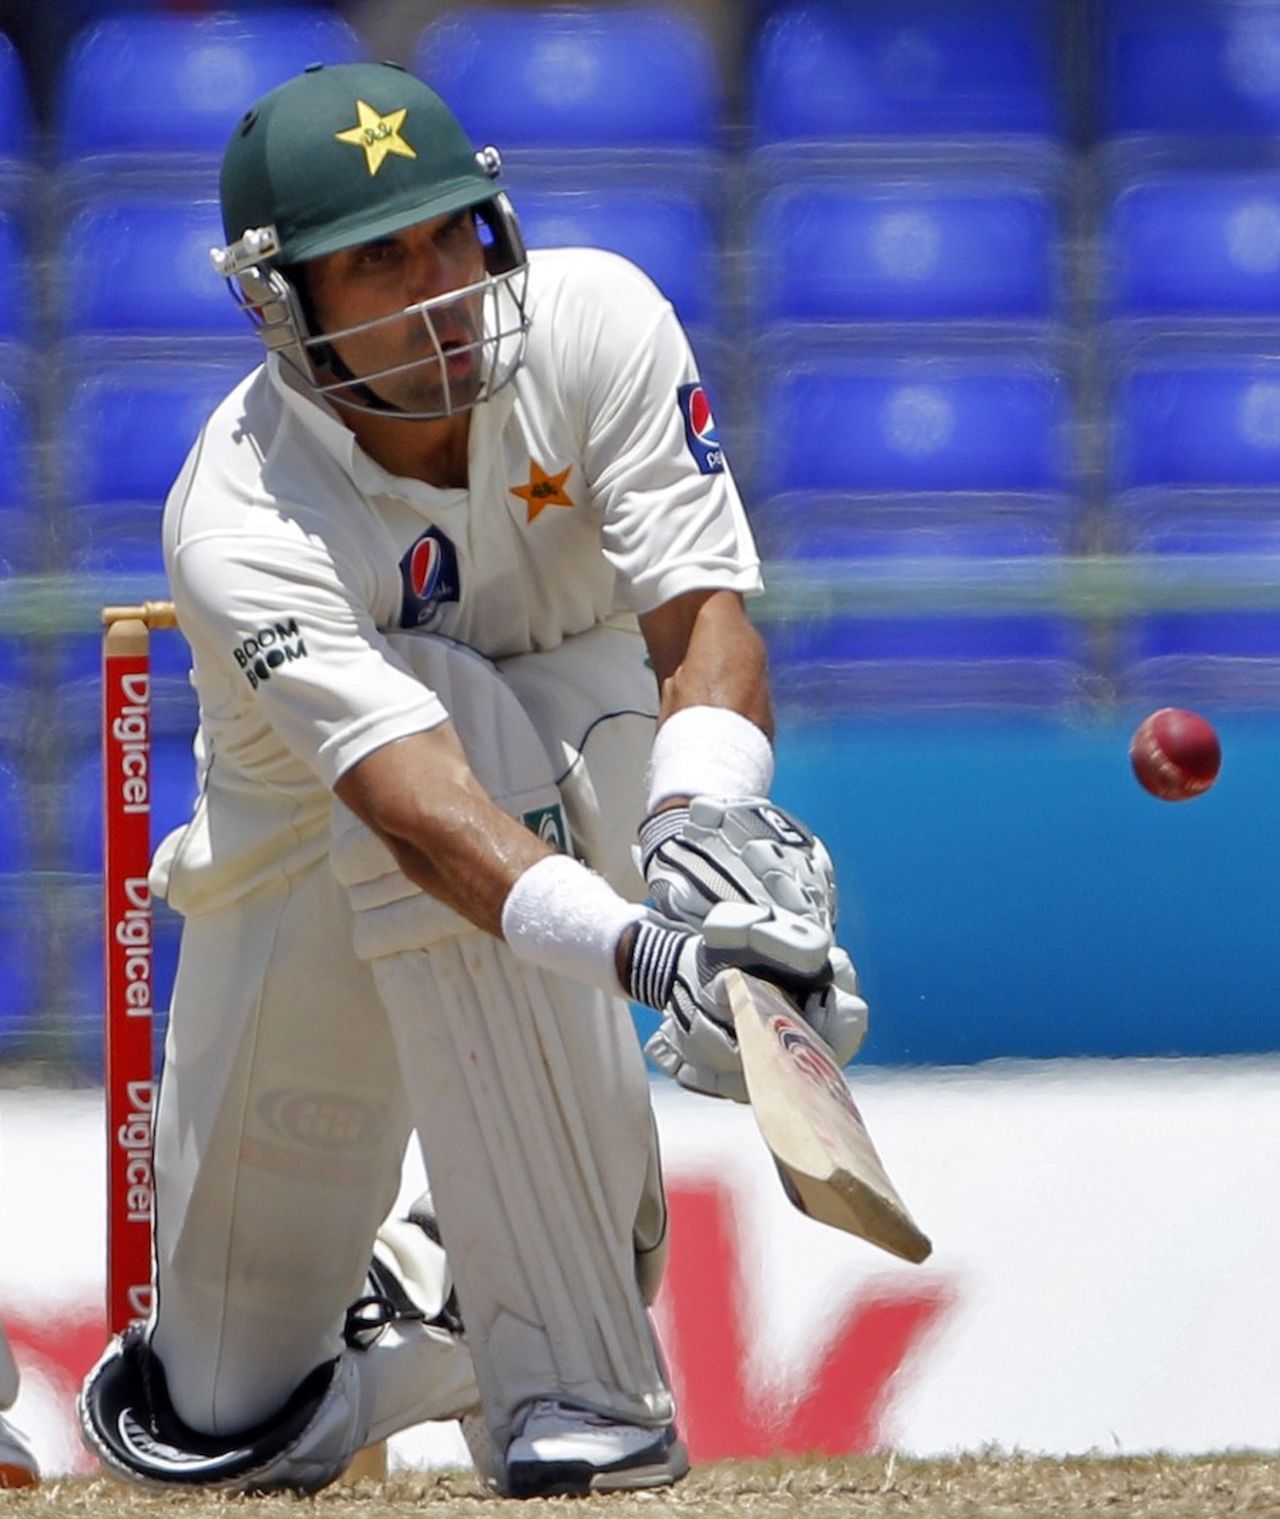 Misbah-ul-Haq gets down low to paddle the ball, West Indies v Pakistan, 2nd Test, St Kitts, 4th day, May 23, 2011